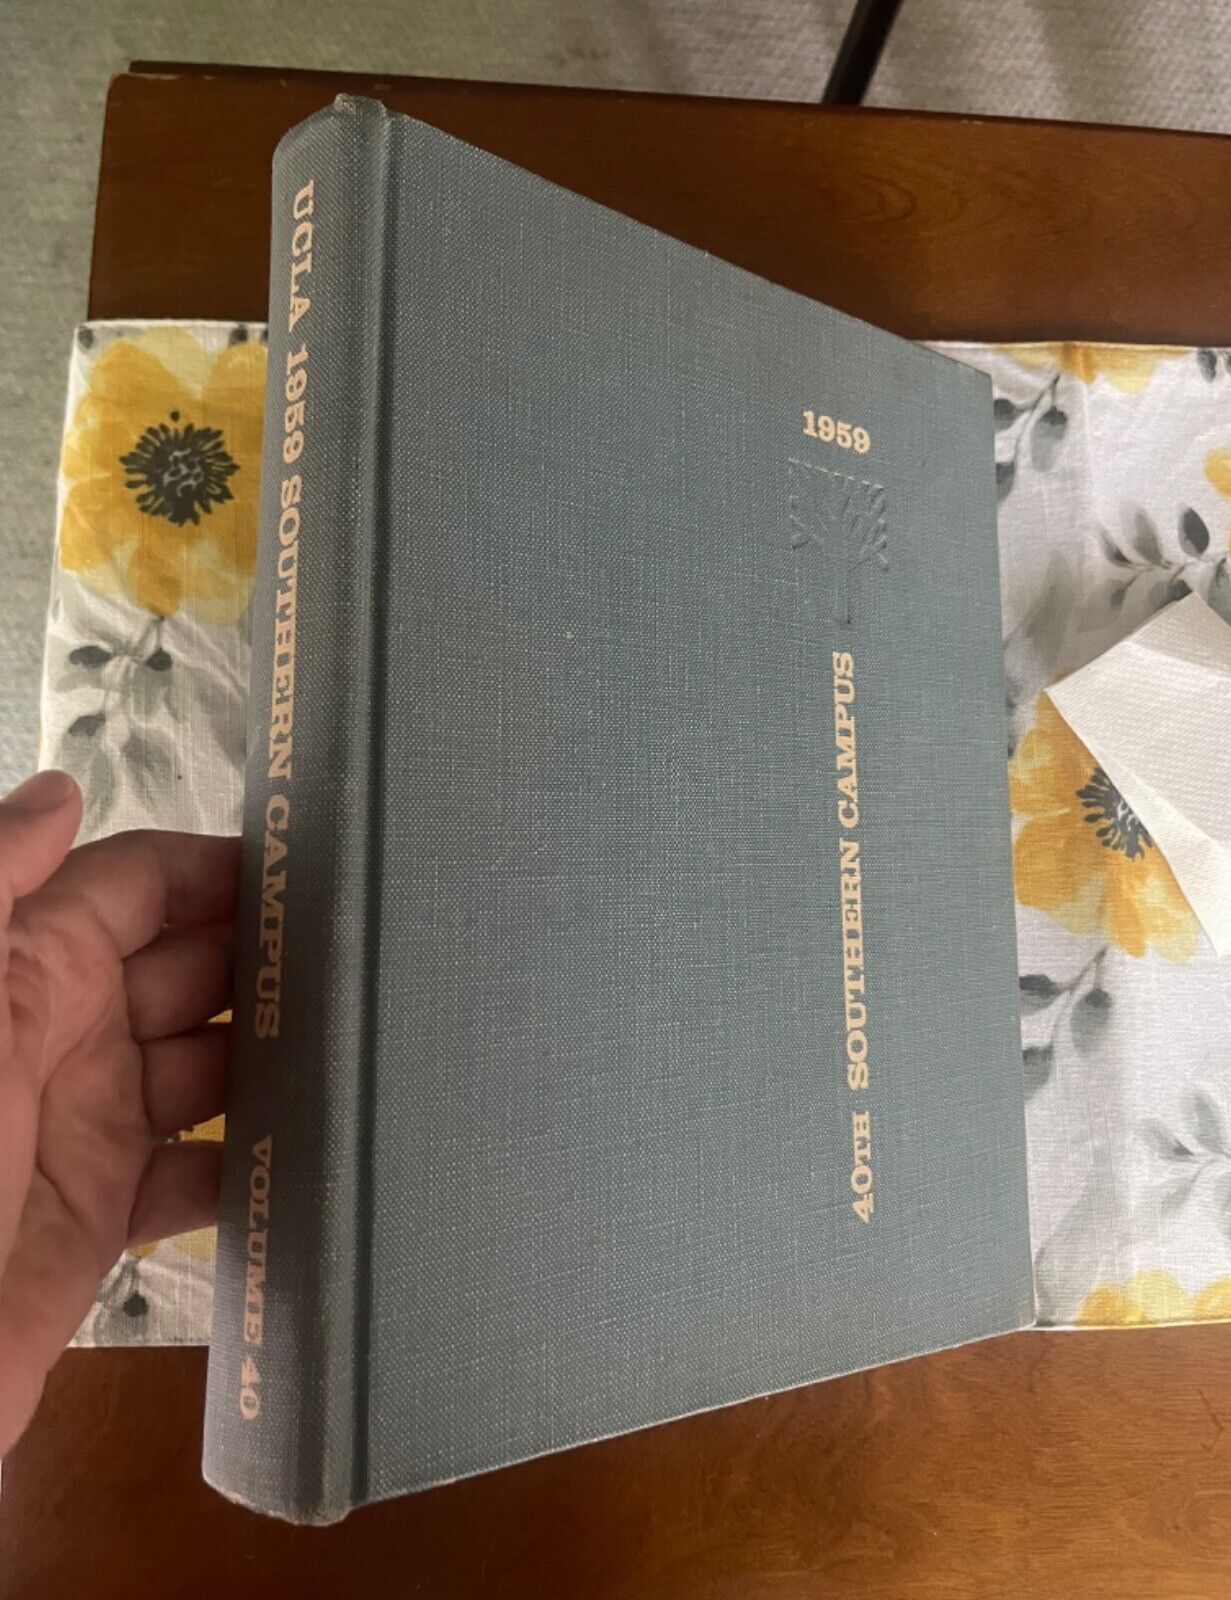 {Excellent} ~UCLA 1959 Yearbook~ Southern Campus Vol 40. {No Writing}